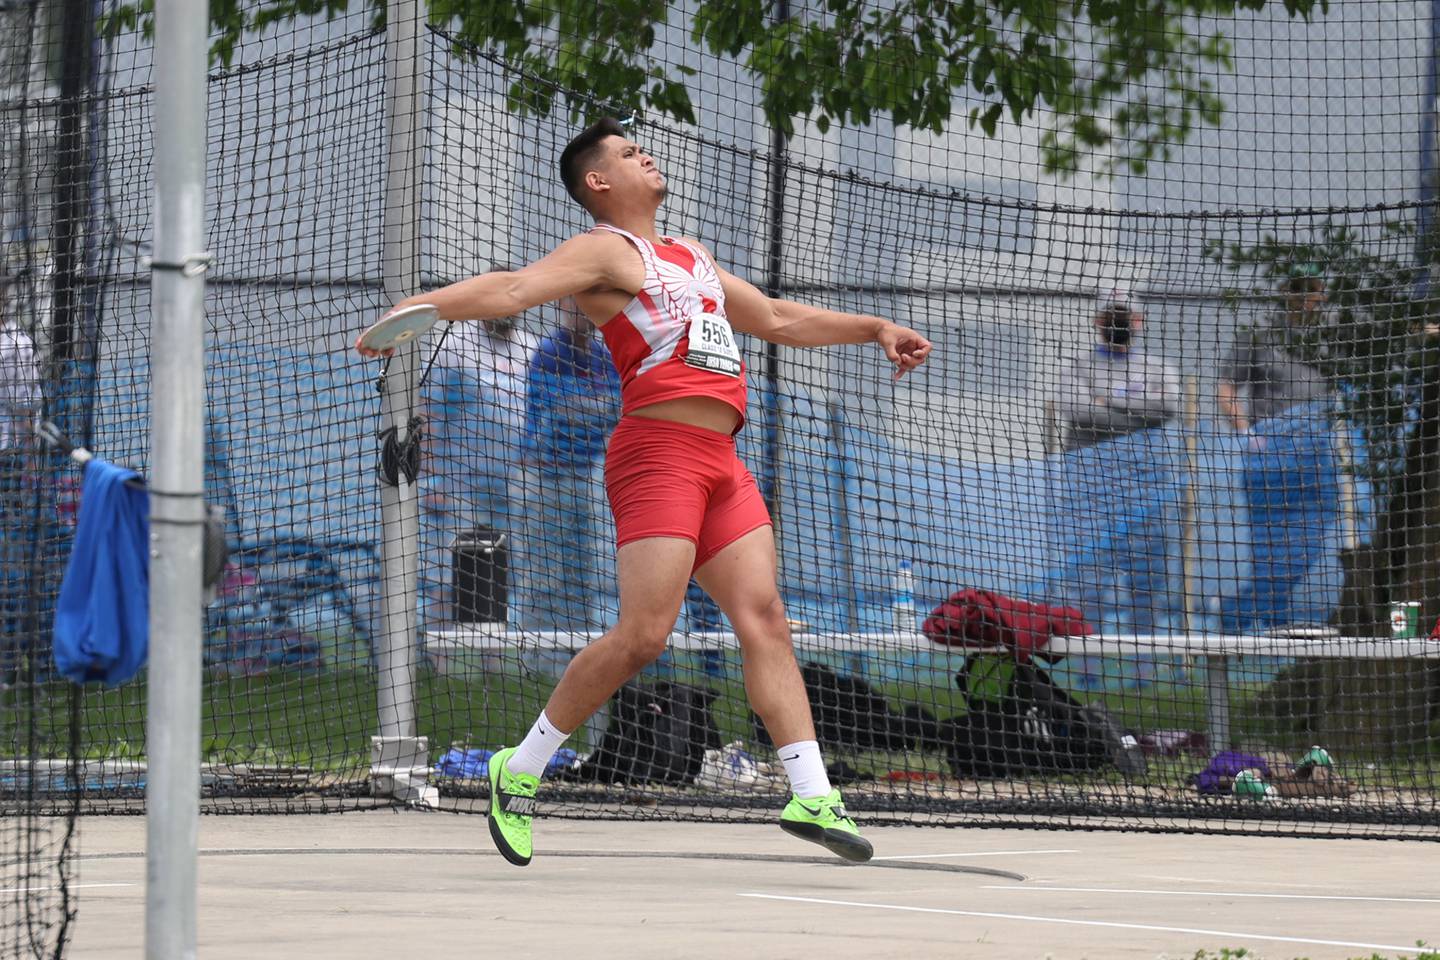 Oregon’s Daniel Dominguez competes in the Class 1A Discus Throw State Finals. Saturday, May 28, 2022, in Charleston.